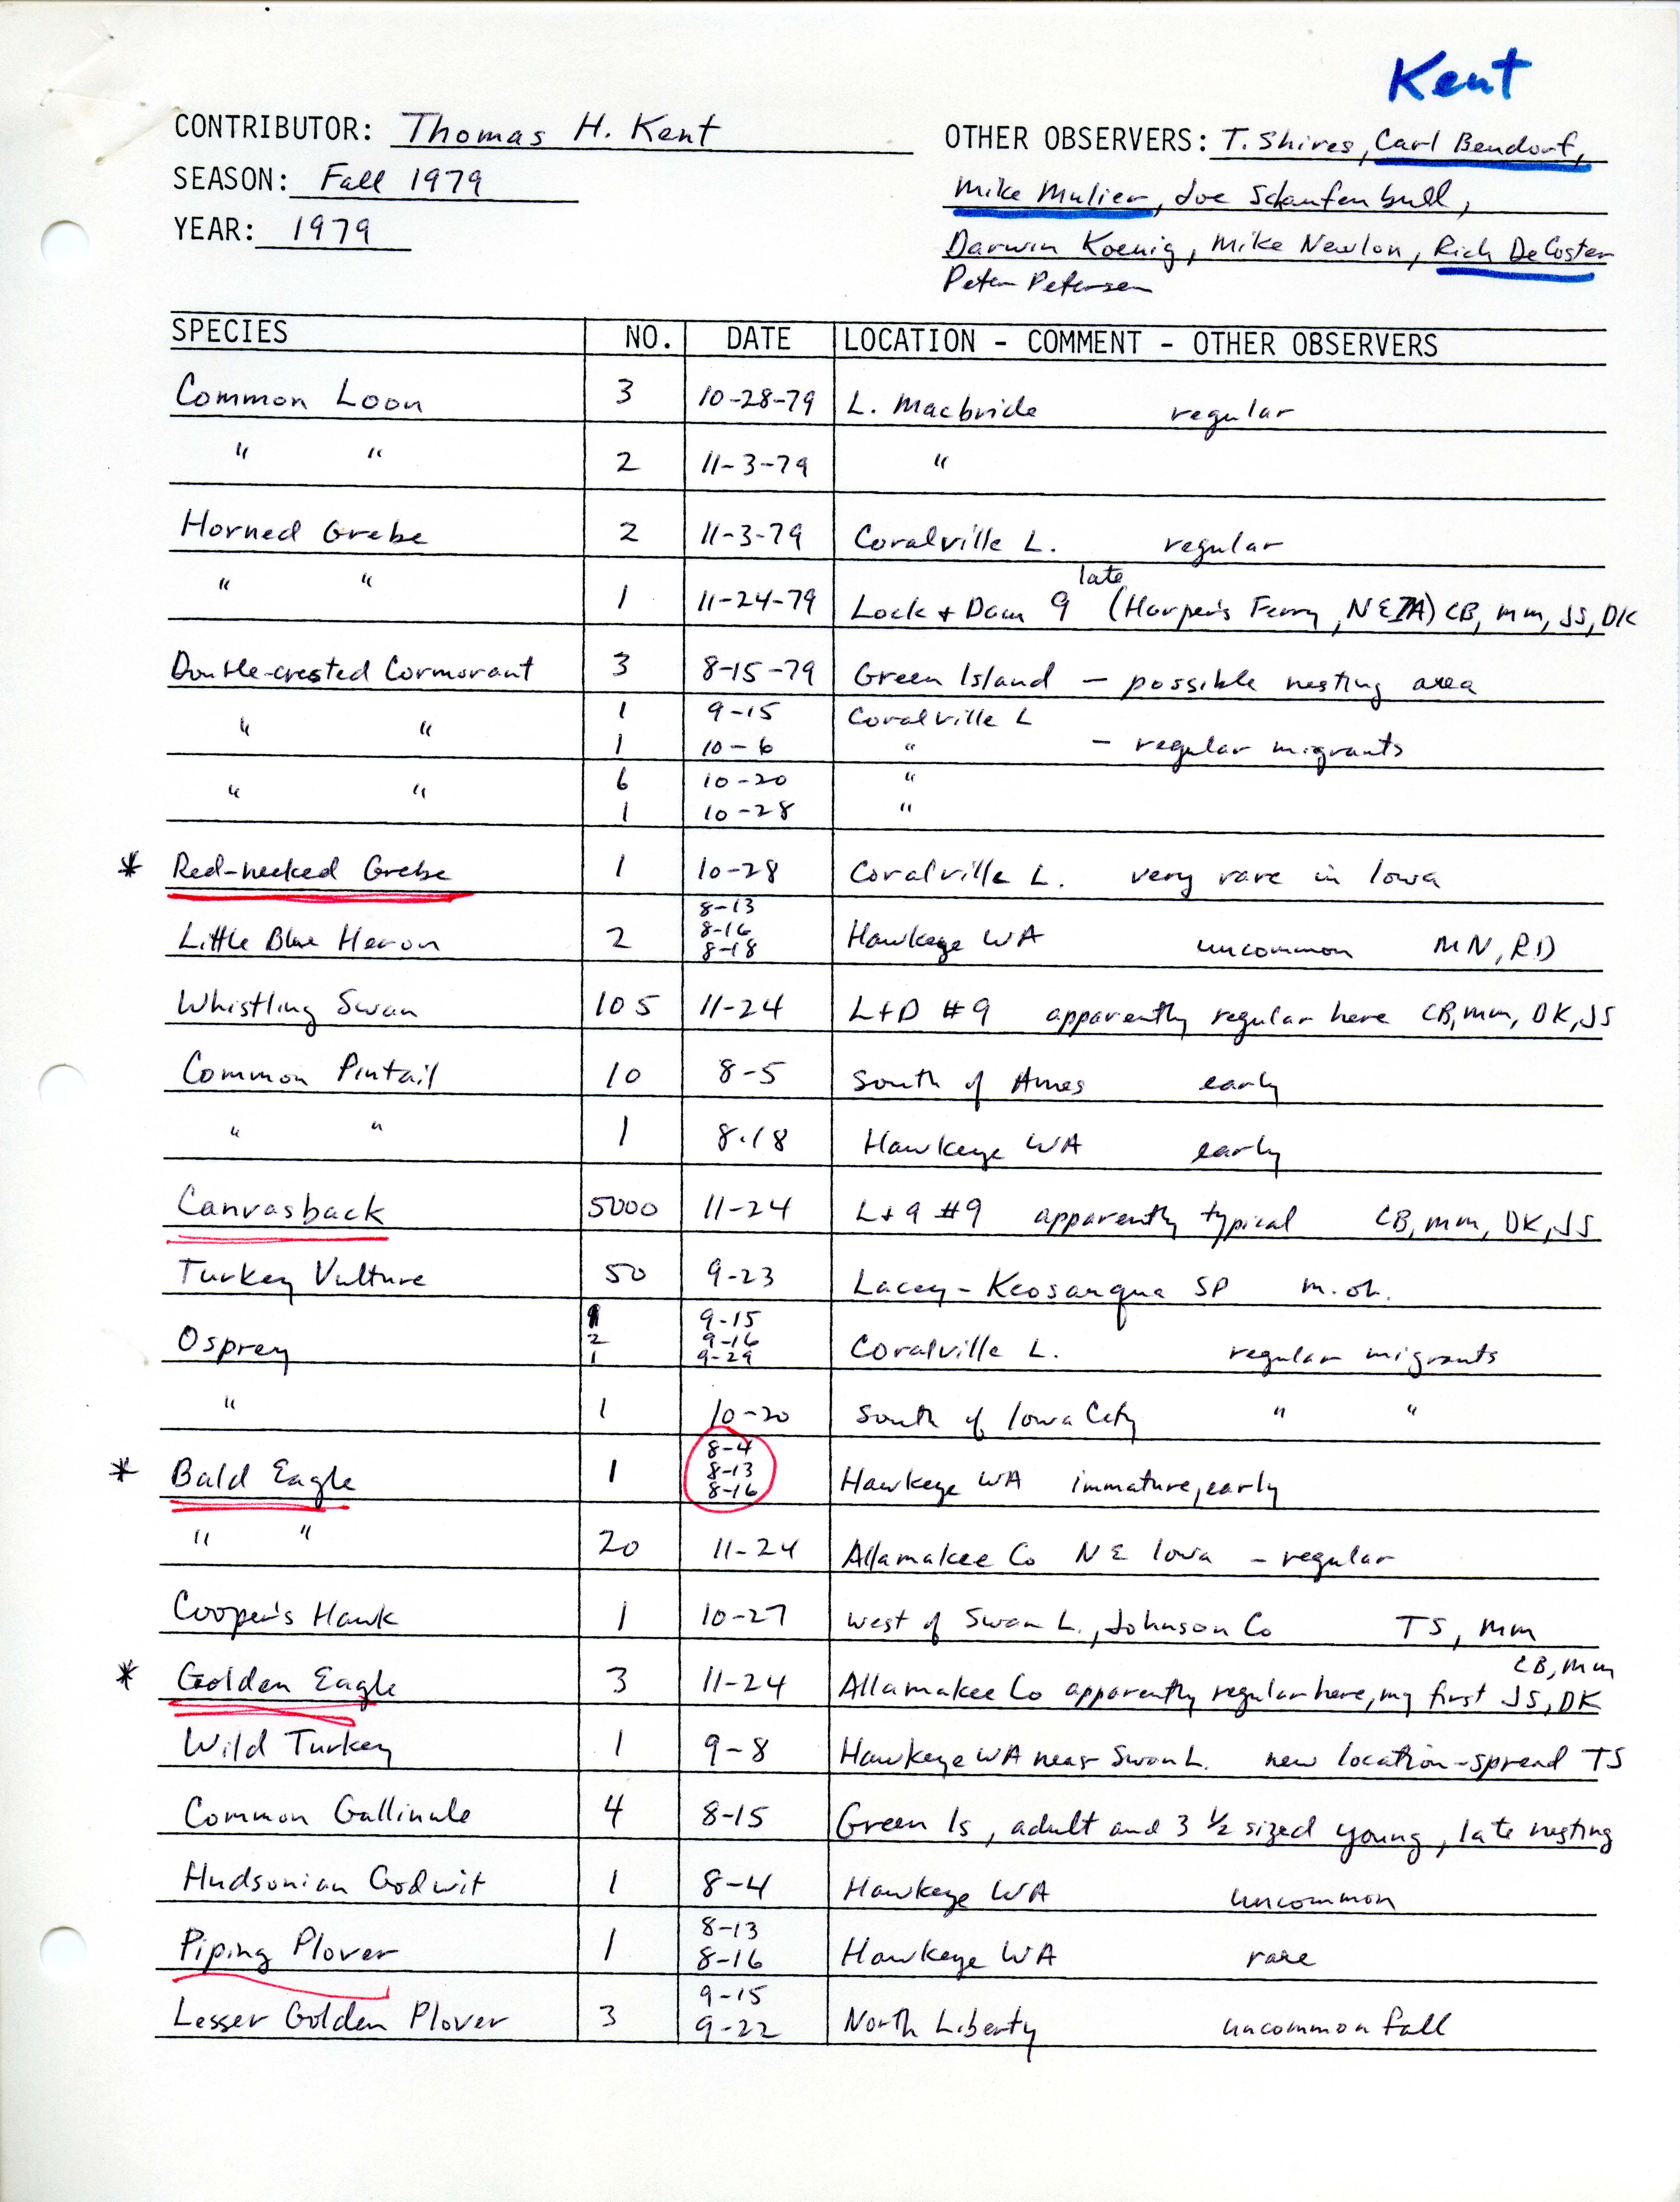 Field notes contributed by Thomas H. Kent, fall 1979